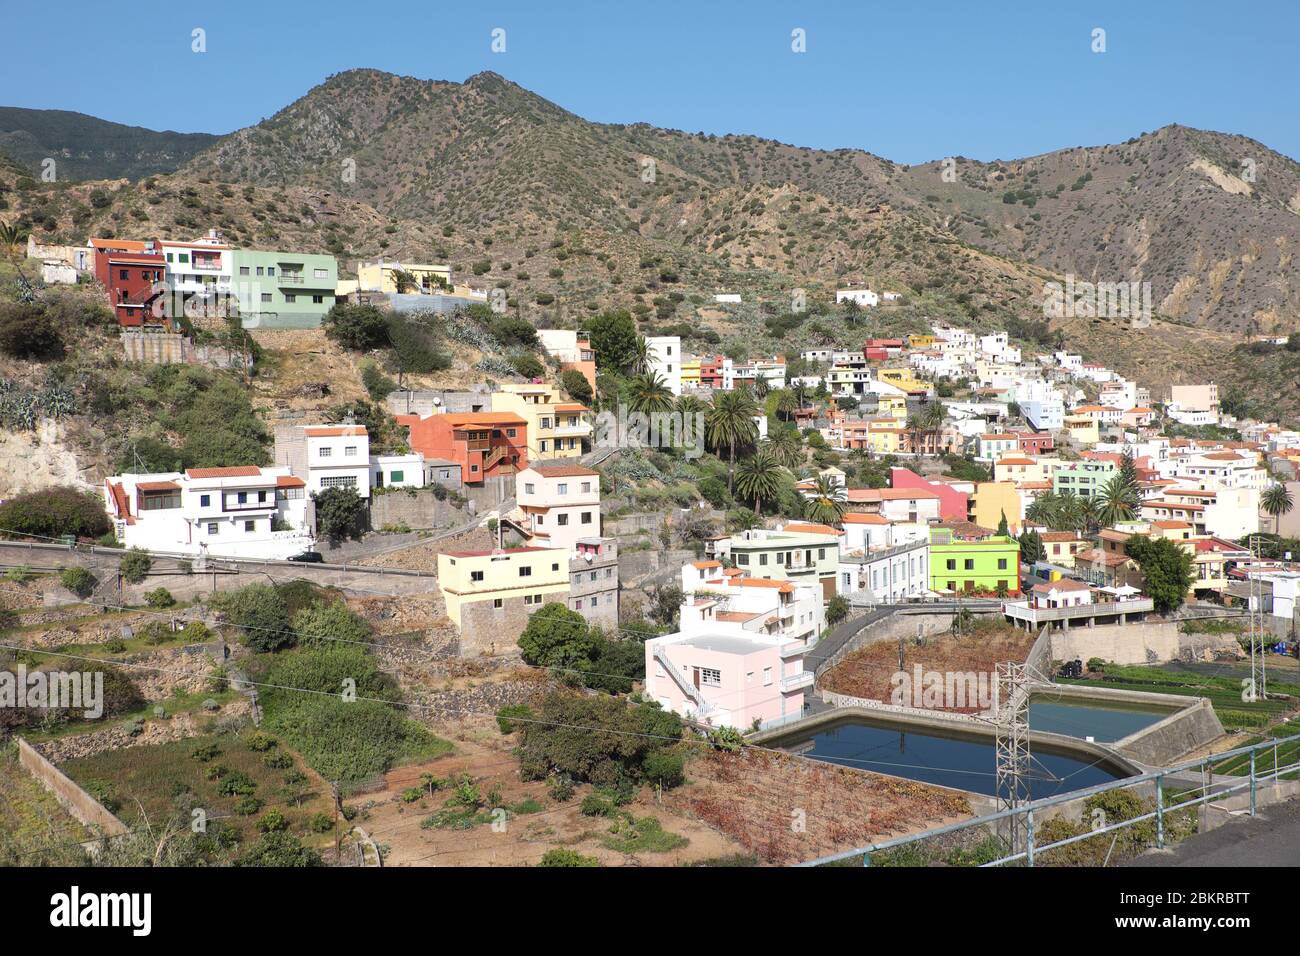 Colourful buildings hug the hillside in the small town of Vallehermoso on La Gomera, Canary Islands Stock Photo